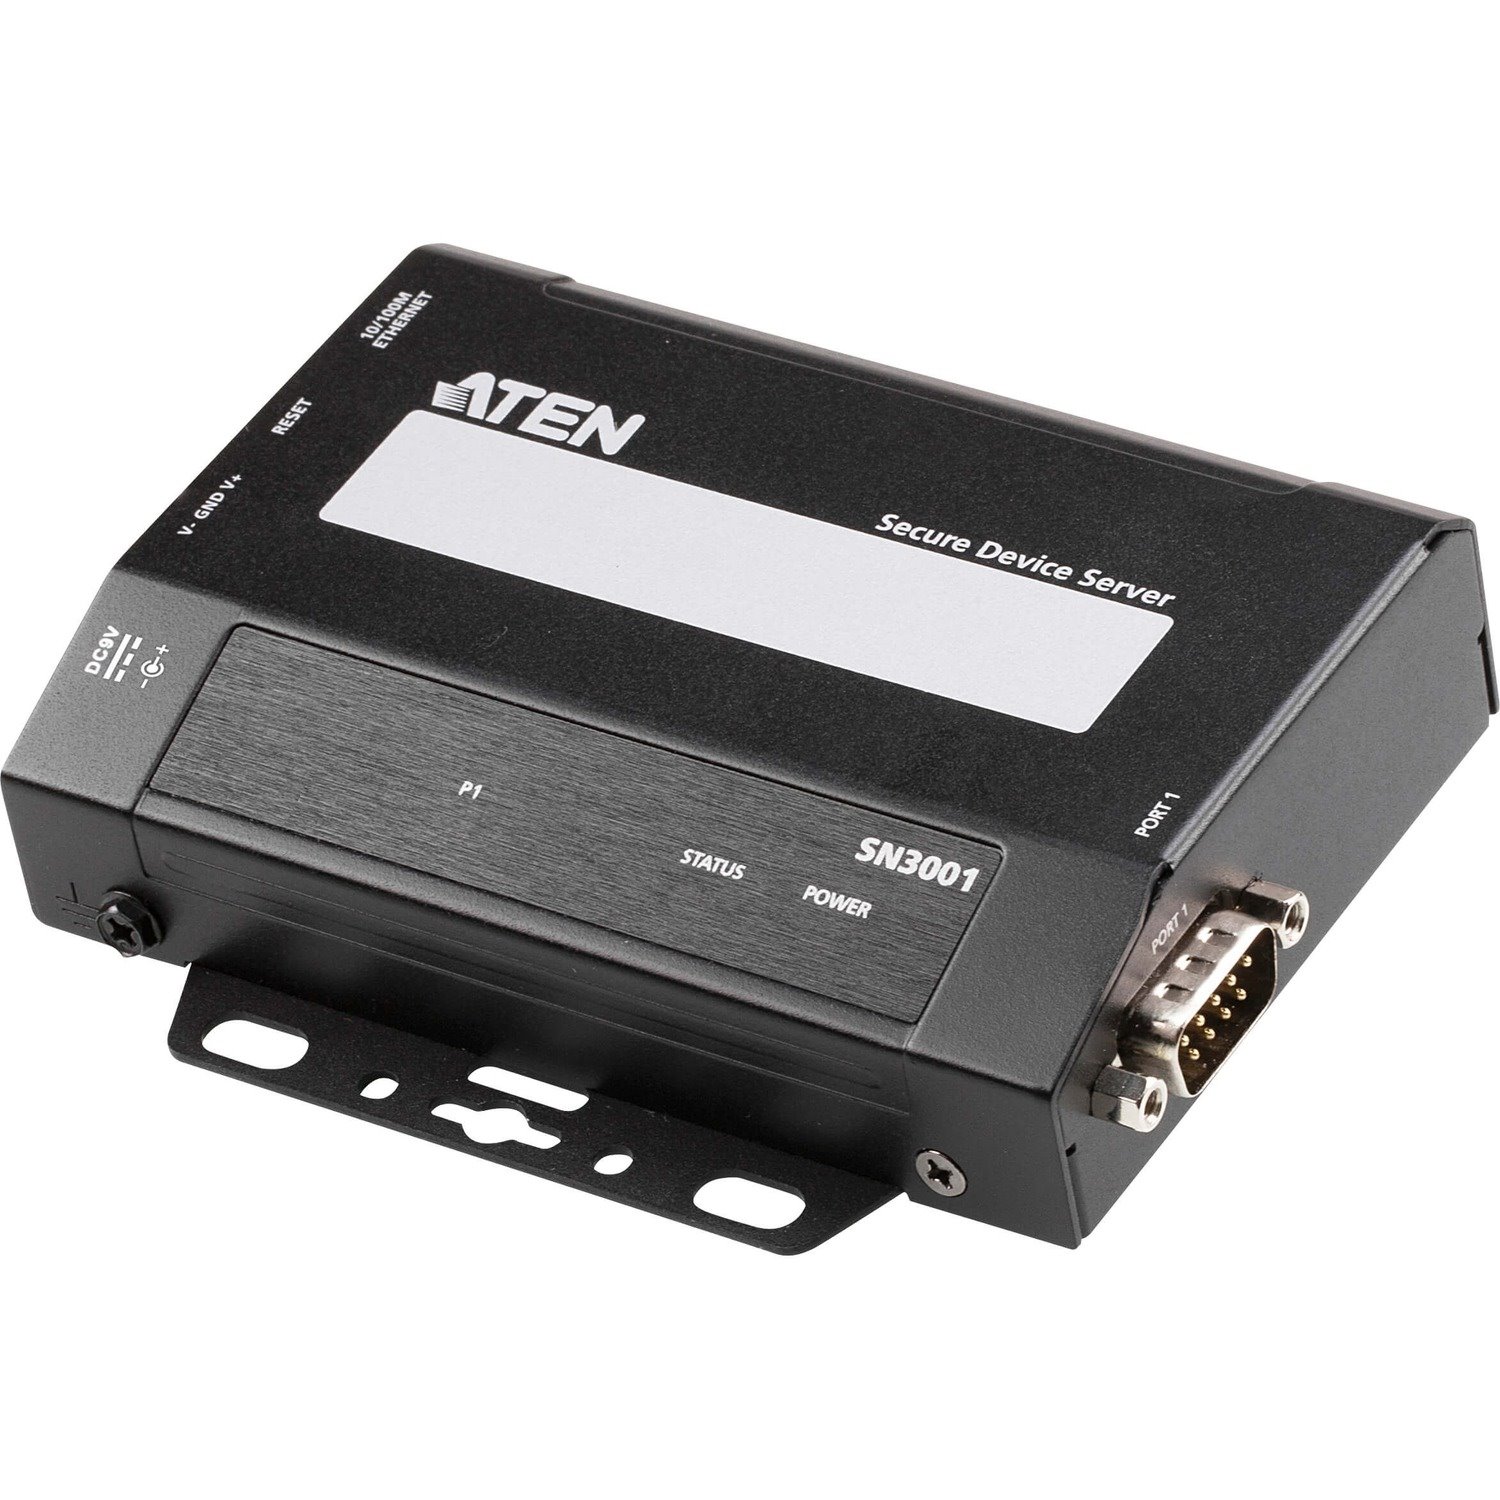 ATEN SN3001 1-Port RS-232 Secure Device Server